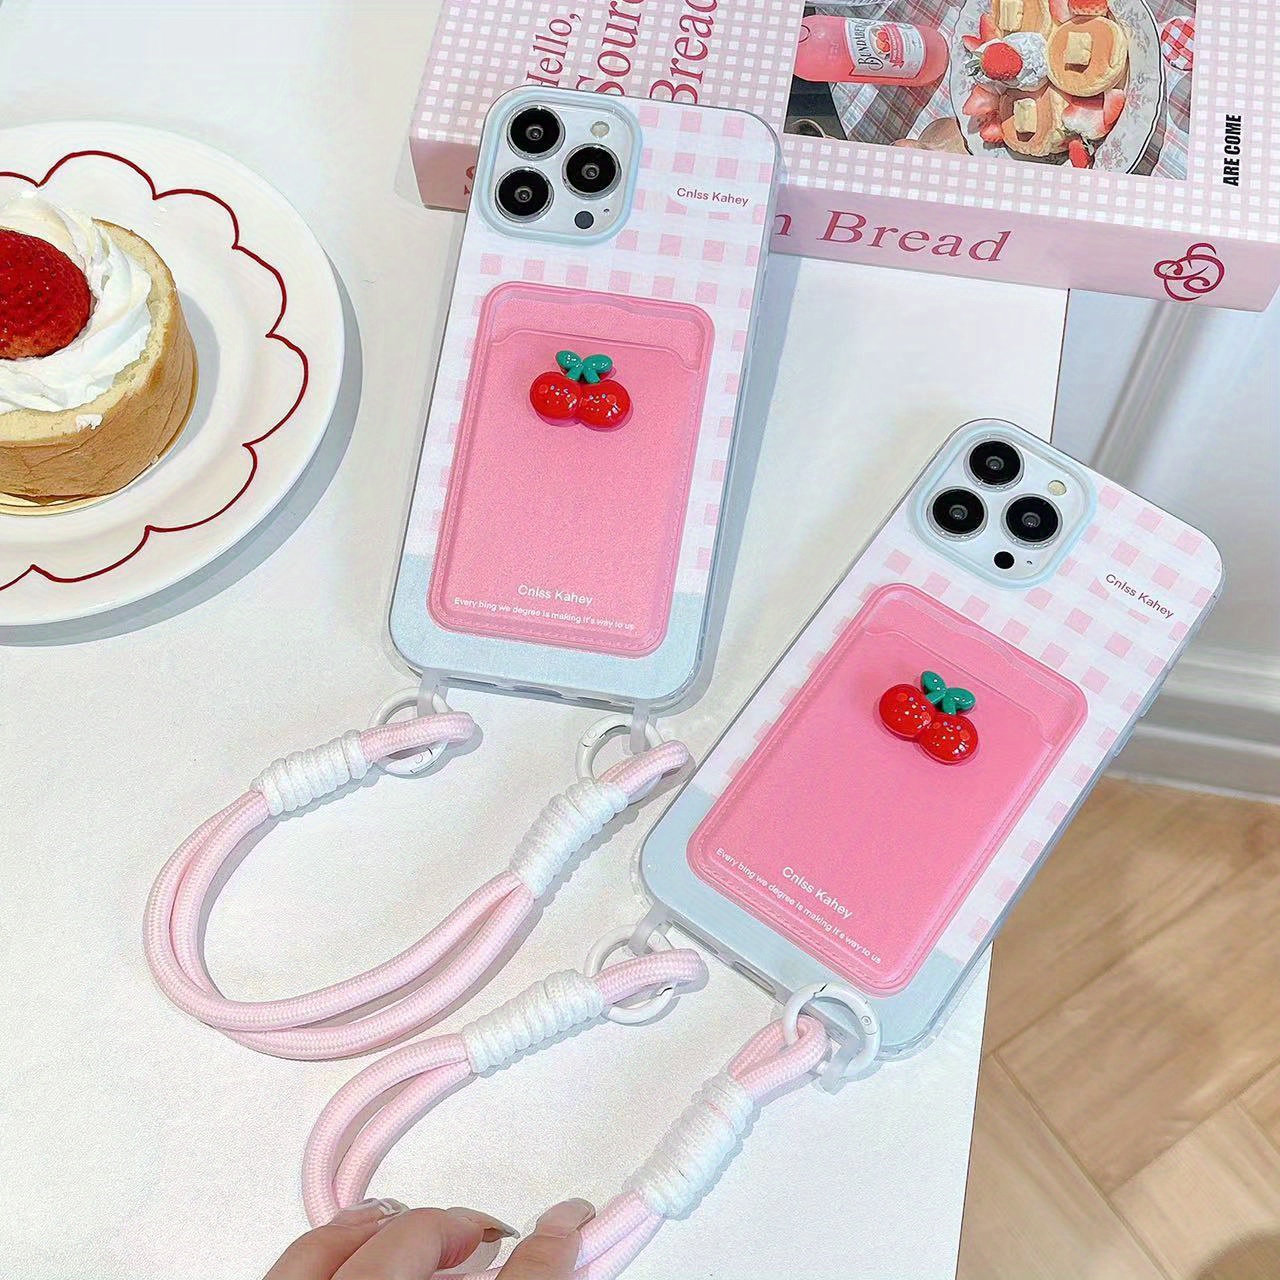 

Cherry Charm Gingham Checkered Tpu Phone Case With Card Holder And Wrist Strap Compatible With Iphone 11/12/13/14/15 Pro Max